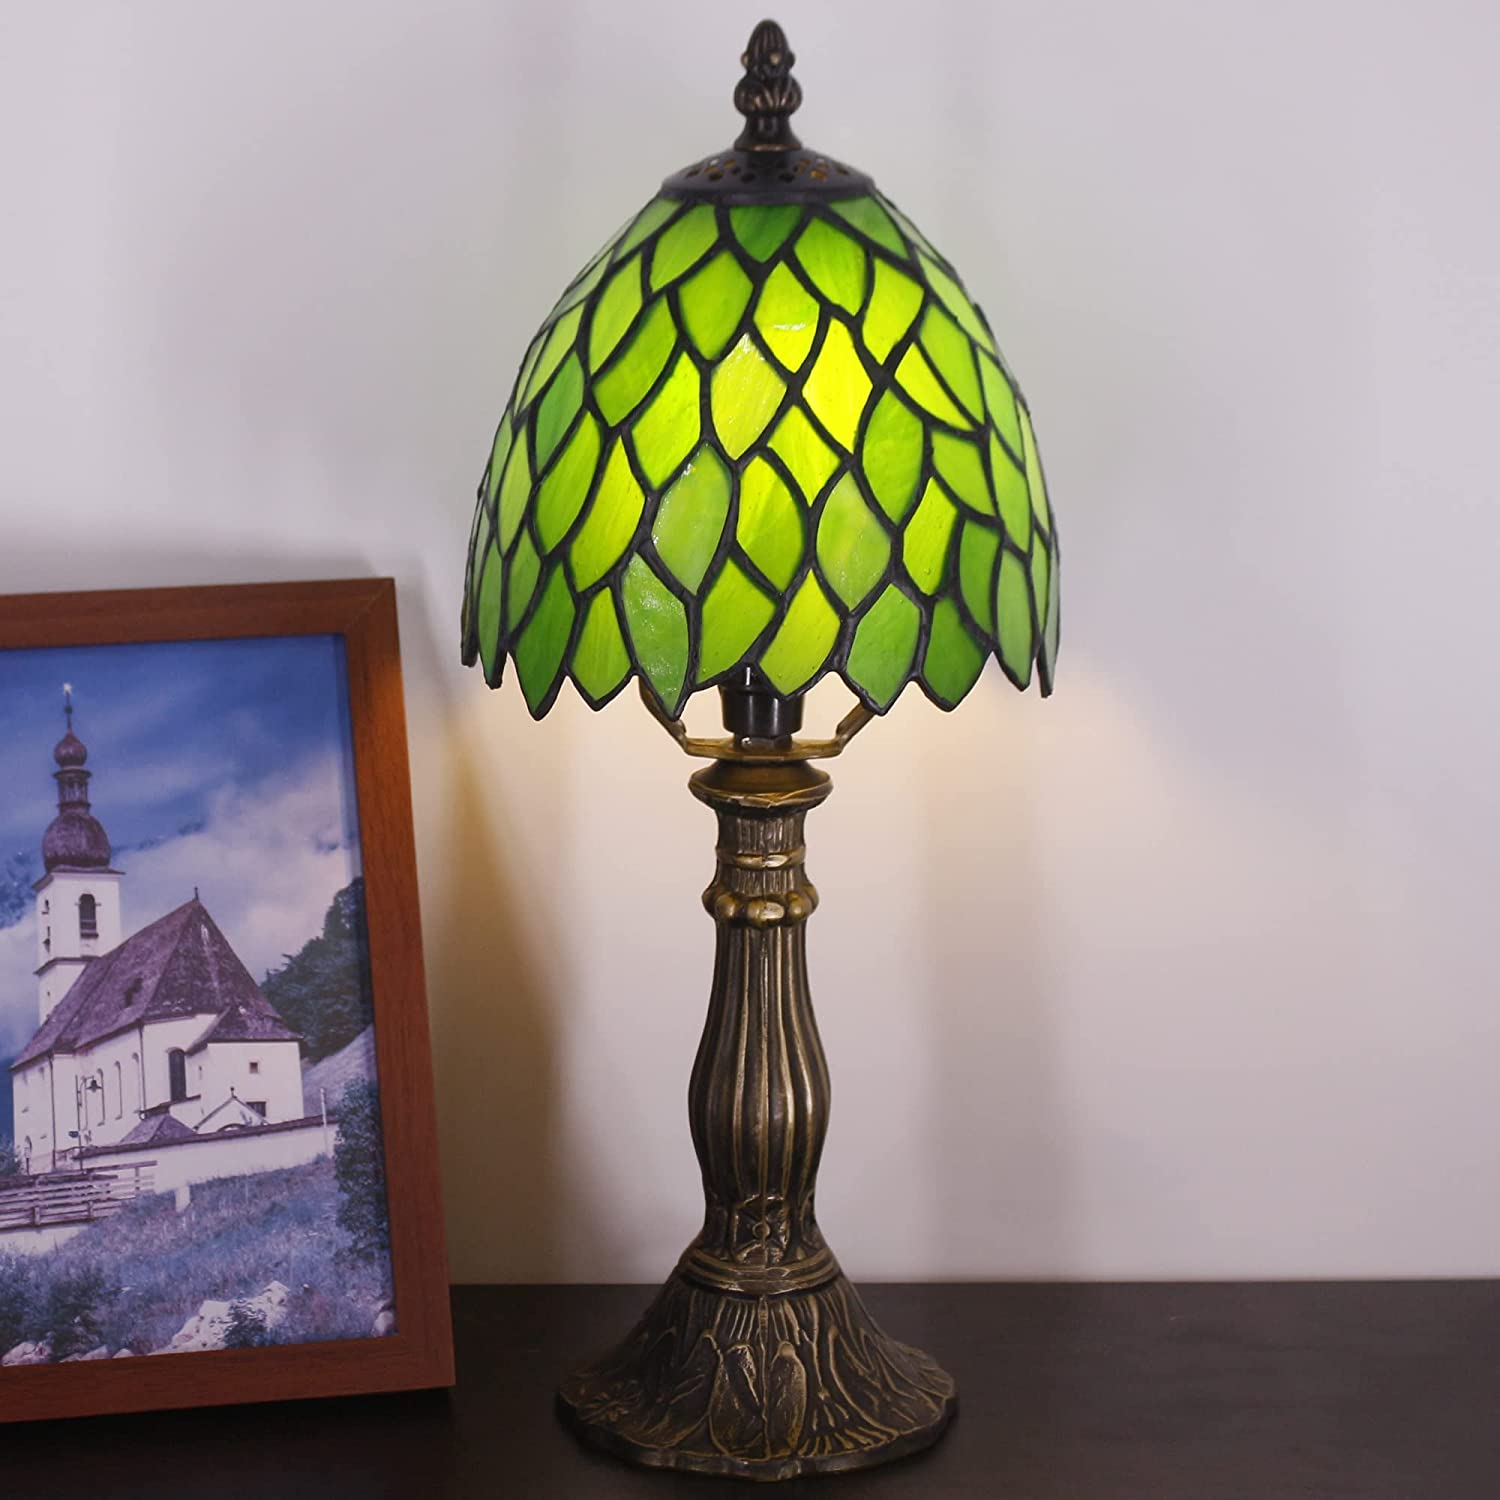 Werfactory® Small Tiffany Lamp Stained Glass Green Leaves Style Table Lamp 14" Tall